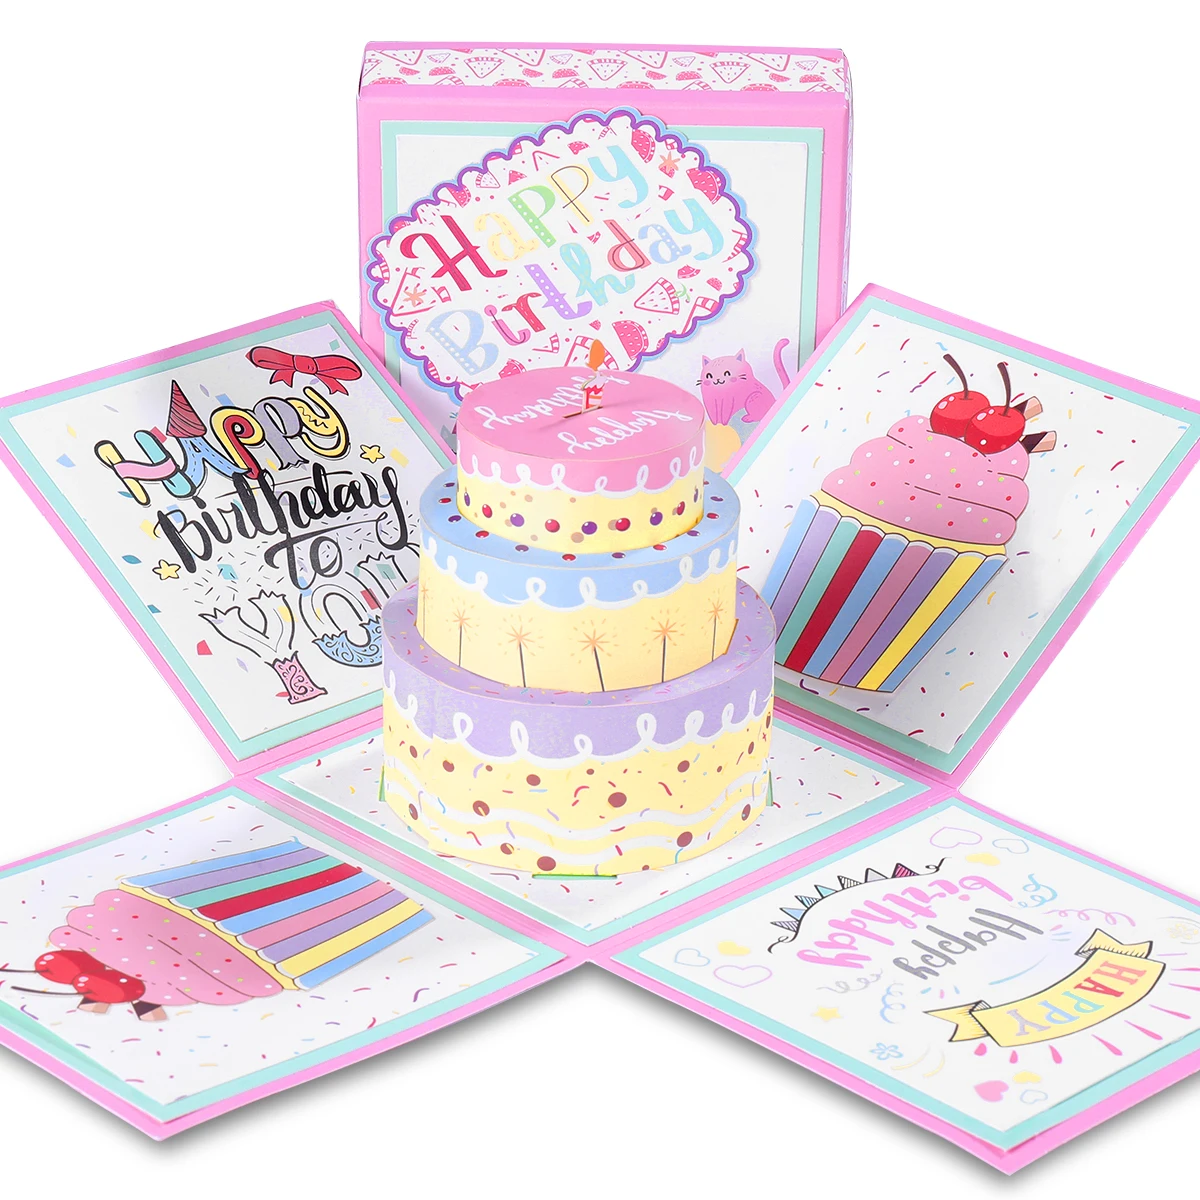 Details about   3D Paper Birthday Cake Box Surprise Wish Card Explosion Box Birthday Gift Box 